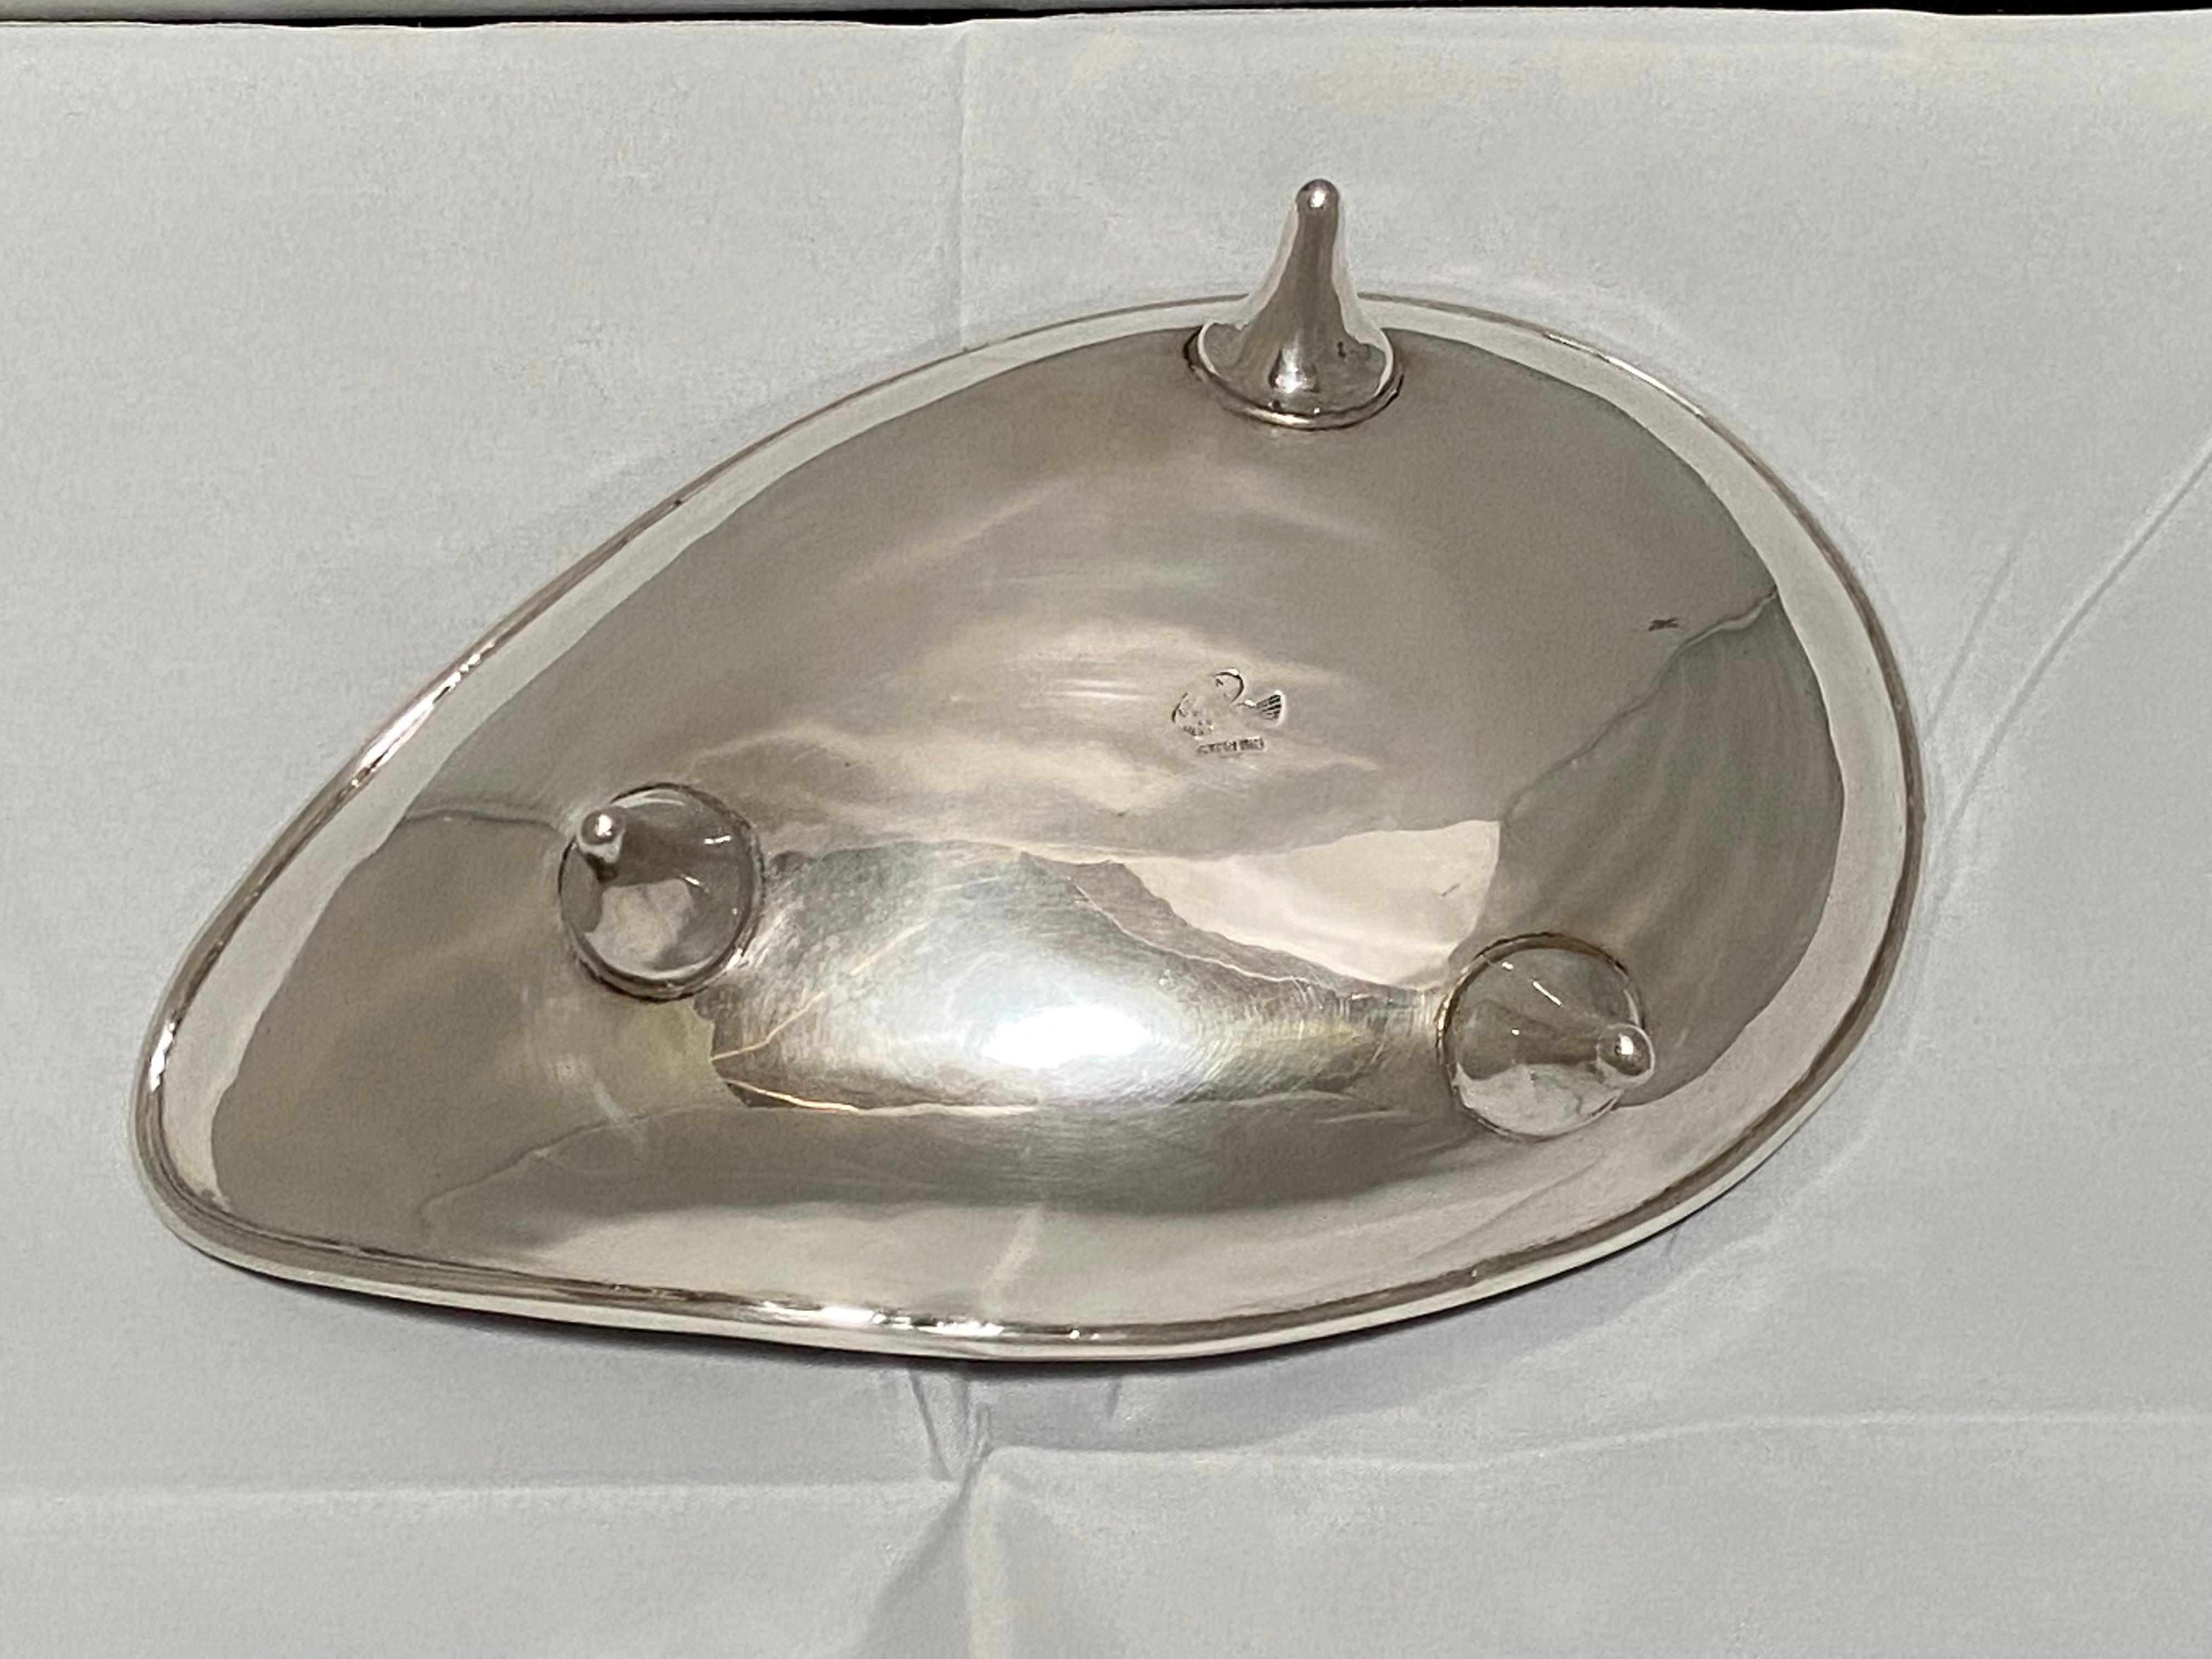 Vintage Mexican Mid-Century Modern Sterling Silver Footed Bowl or Dish by Zurita In Good Condition For Sale In Atlanta, GA